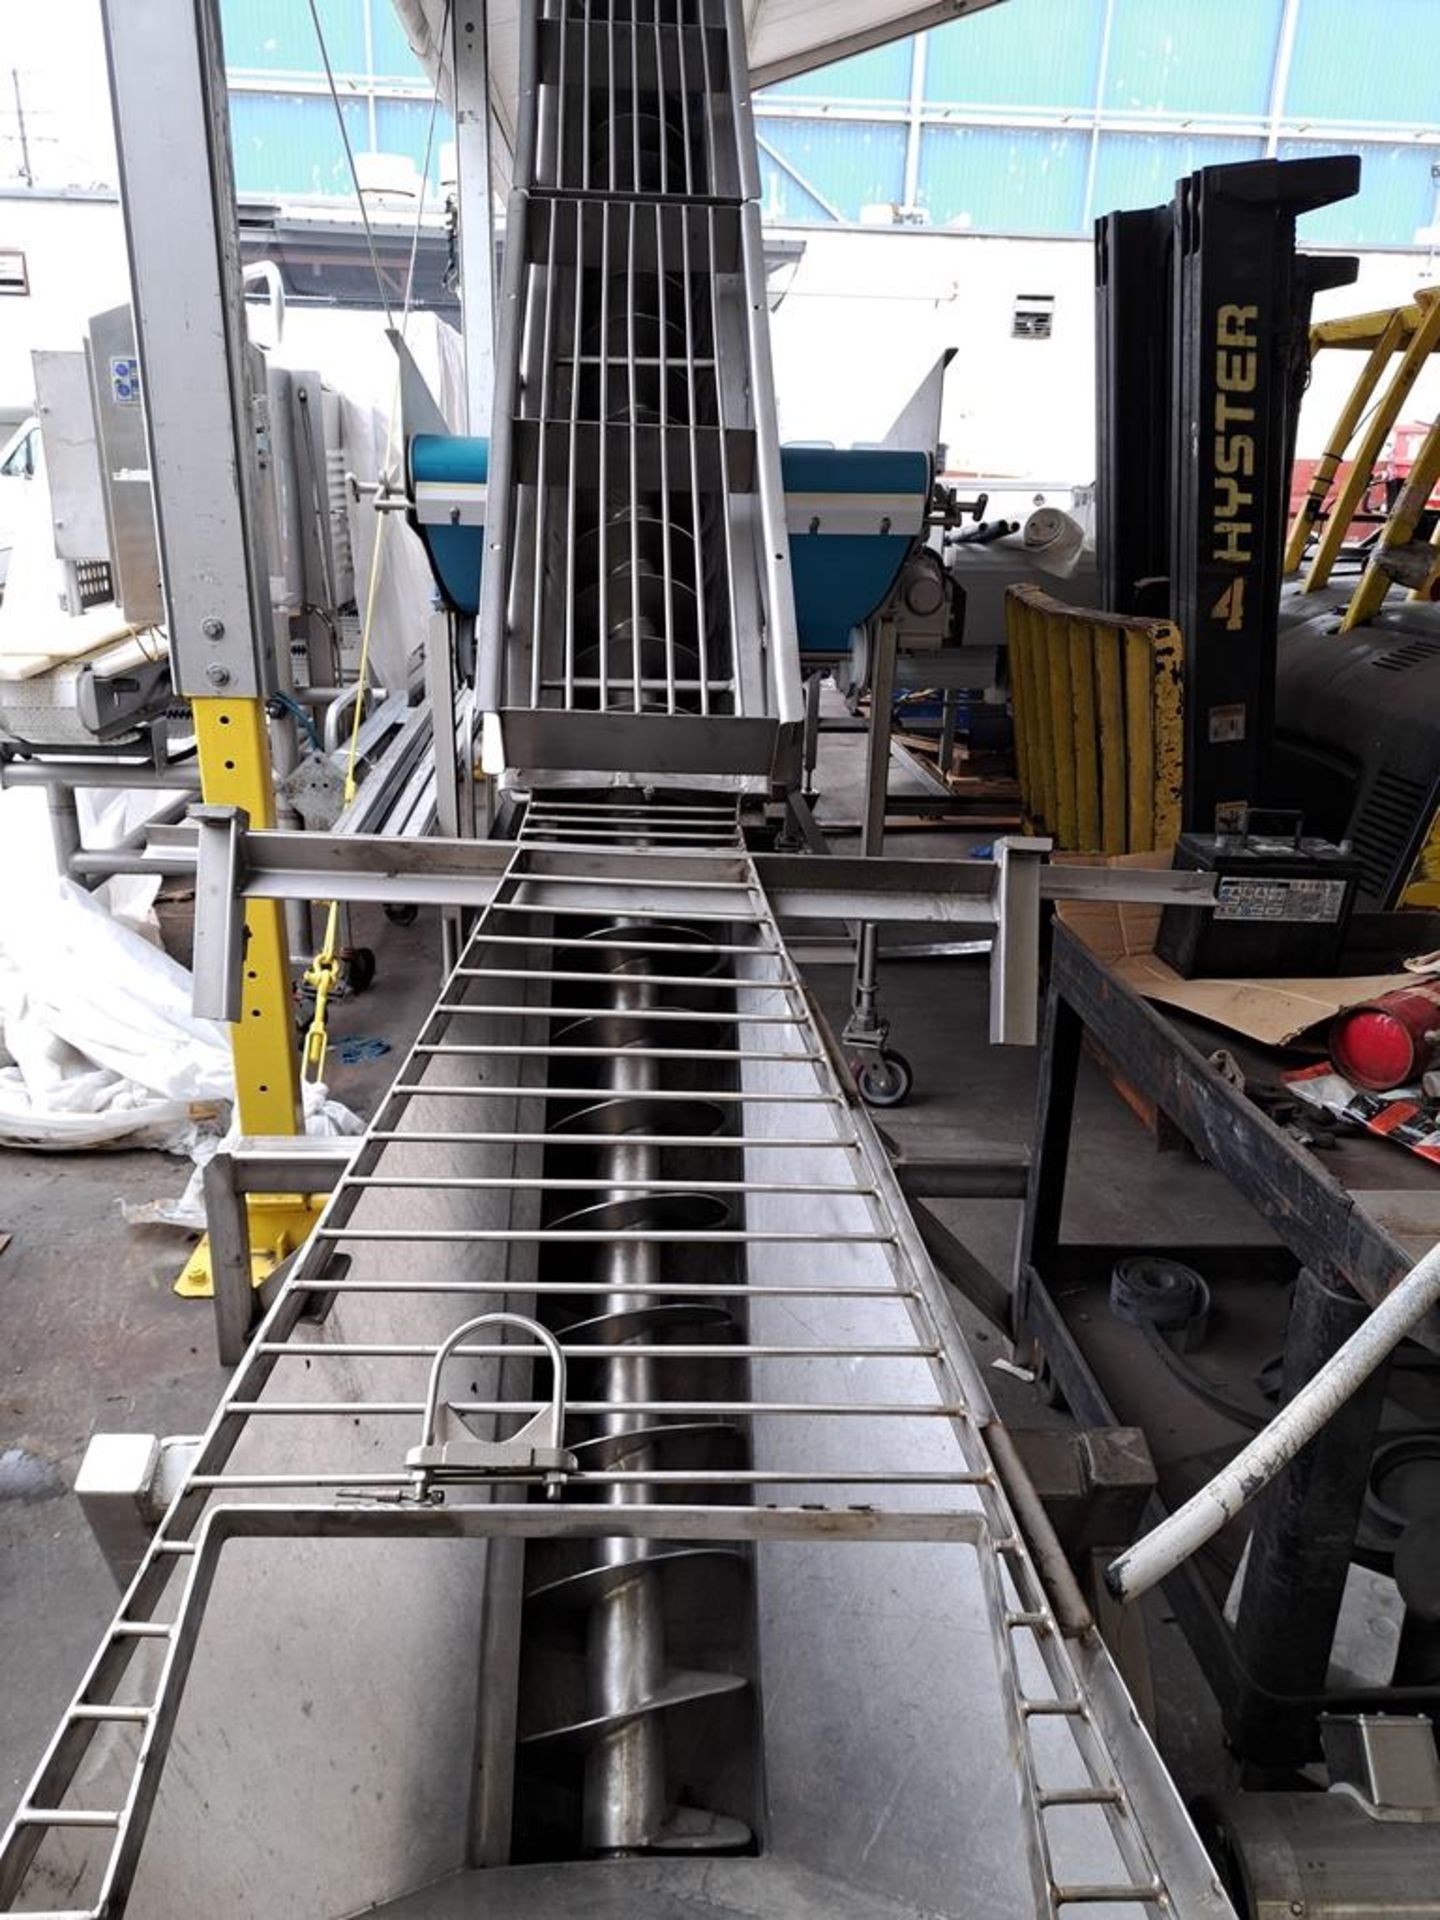 Stainless Steel Screw Conveyor, 8" Dia. X 9' L screw, 26" infeed, 80" discharge, stainless steel - Image 2 of 3